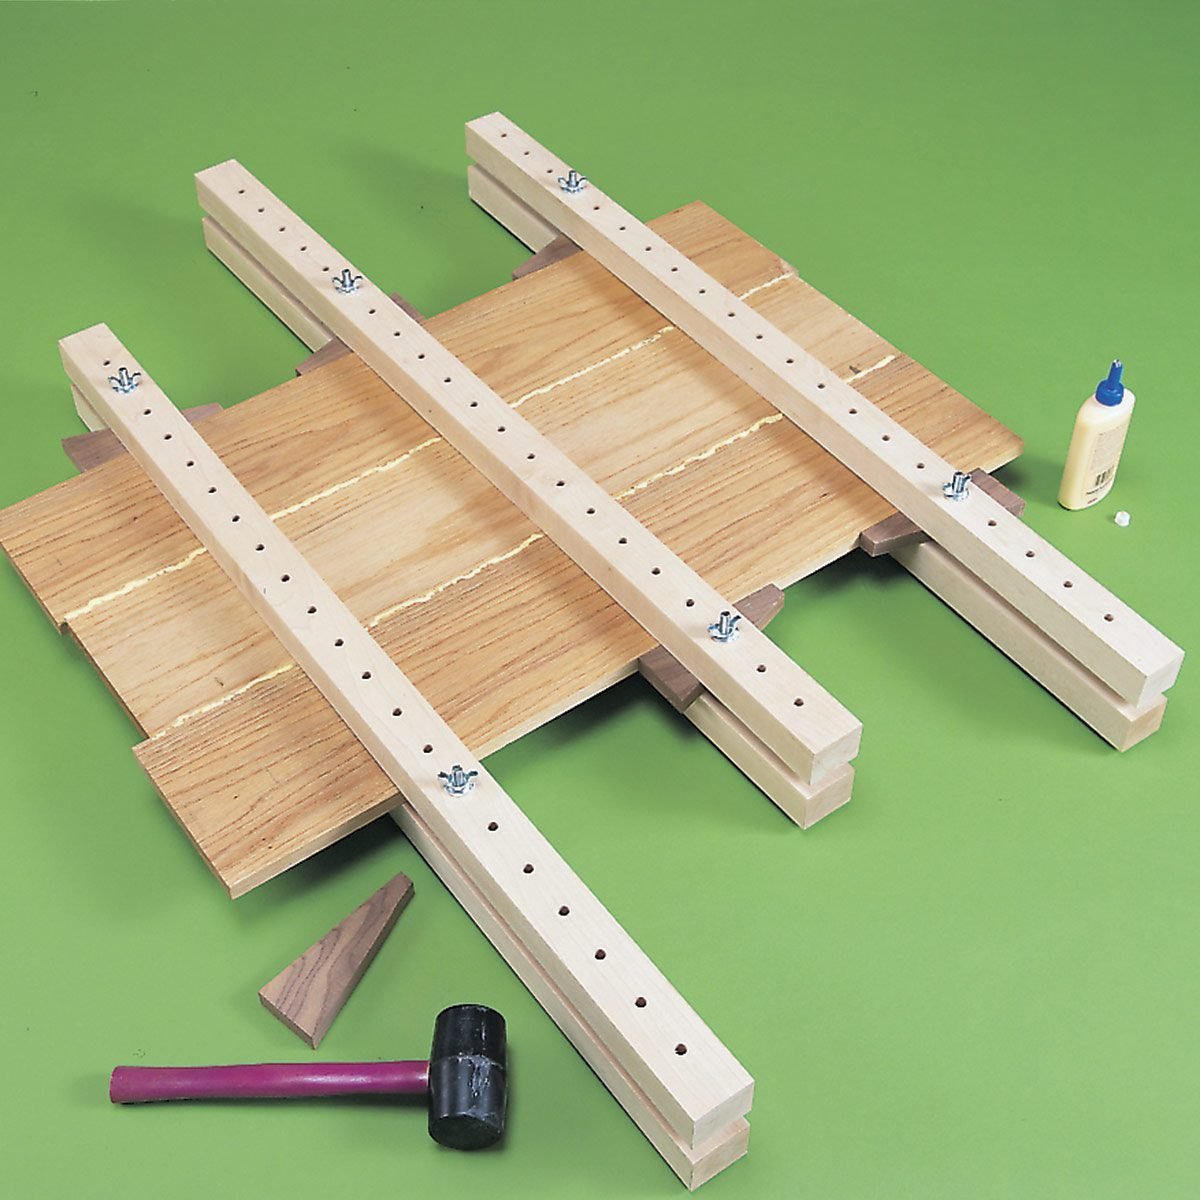 Shop-Made Edge-Gluing Clamps — The Family Handyman